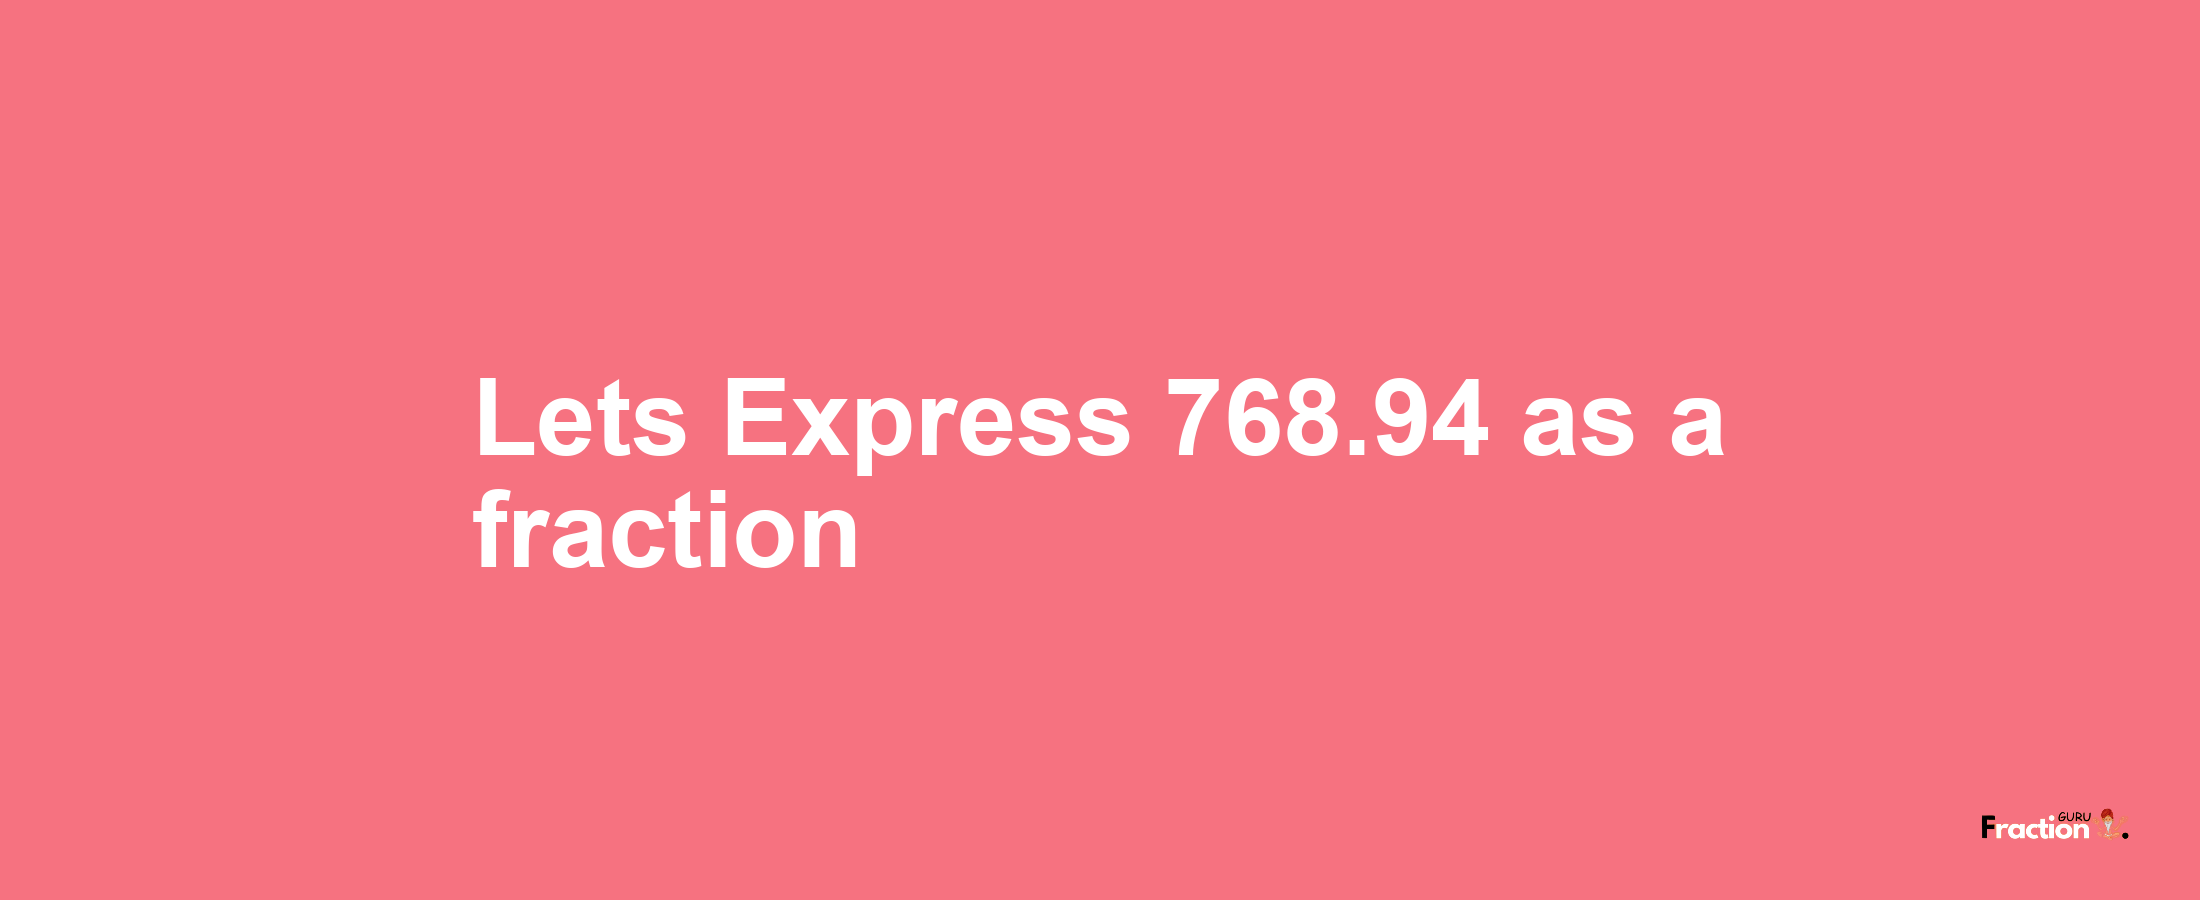 Lets Express 768.94 as afraction